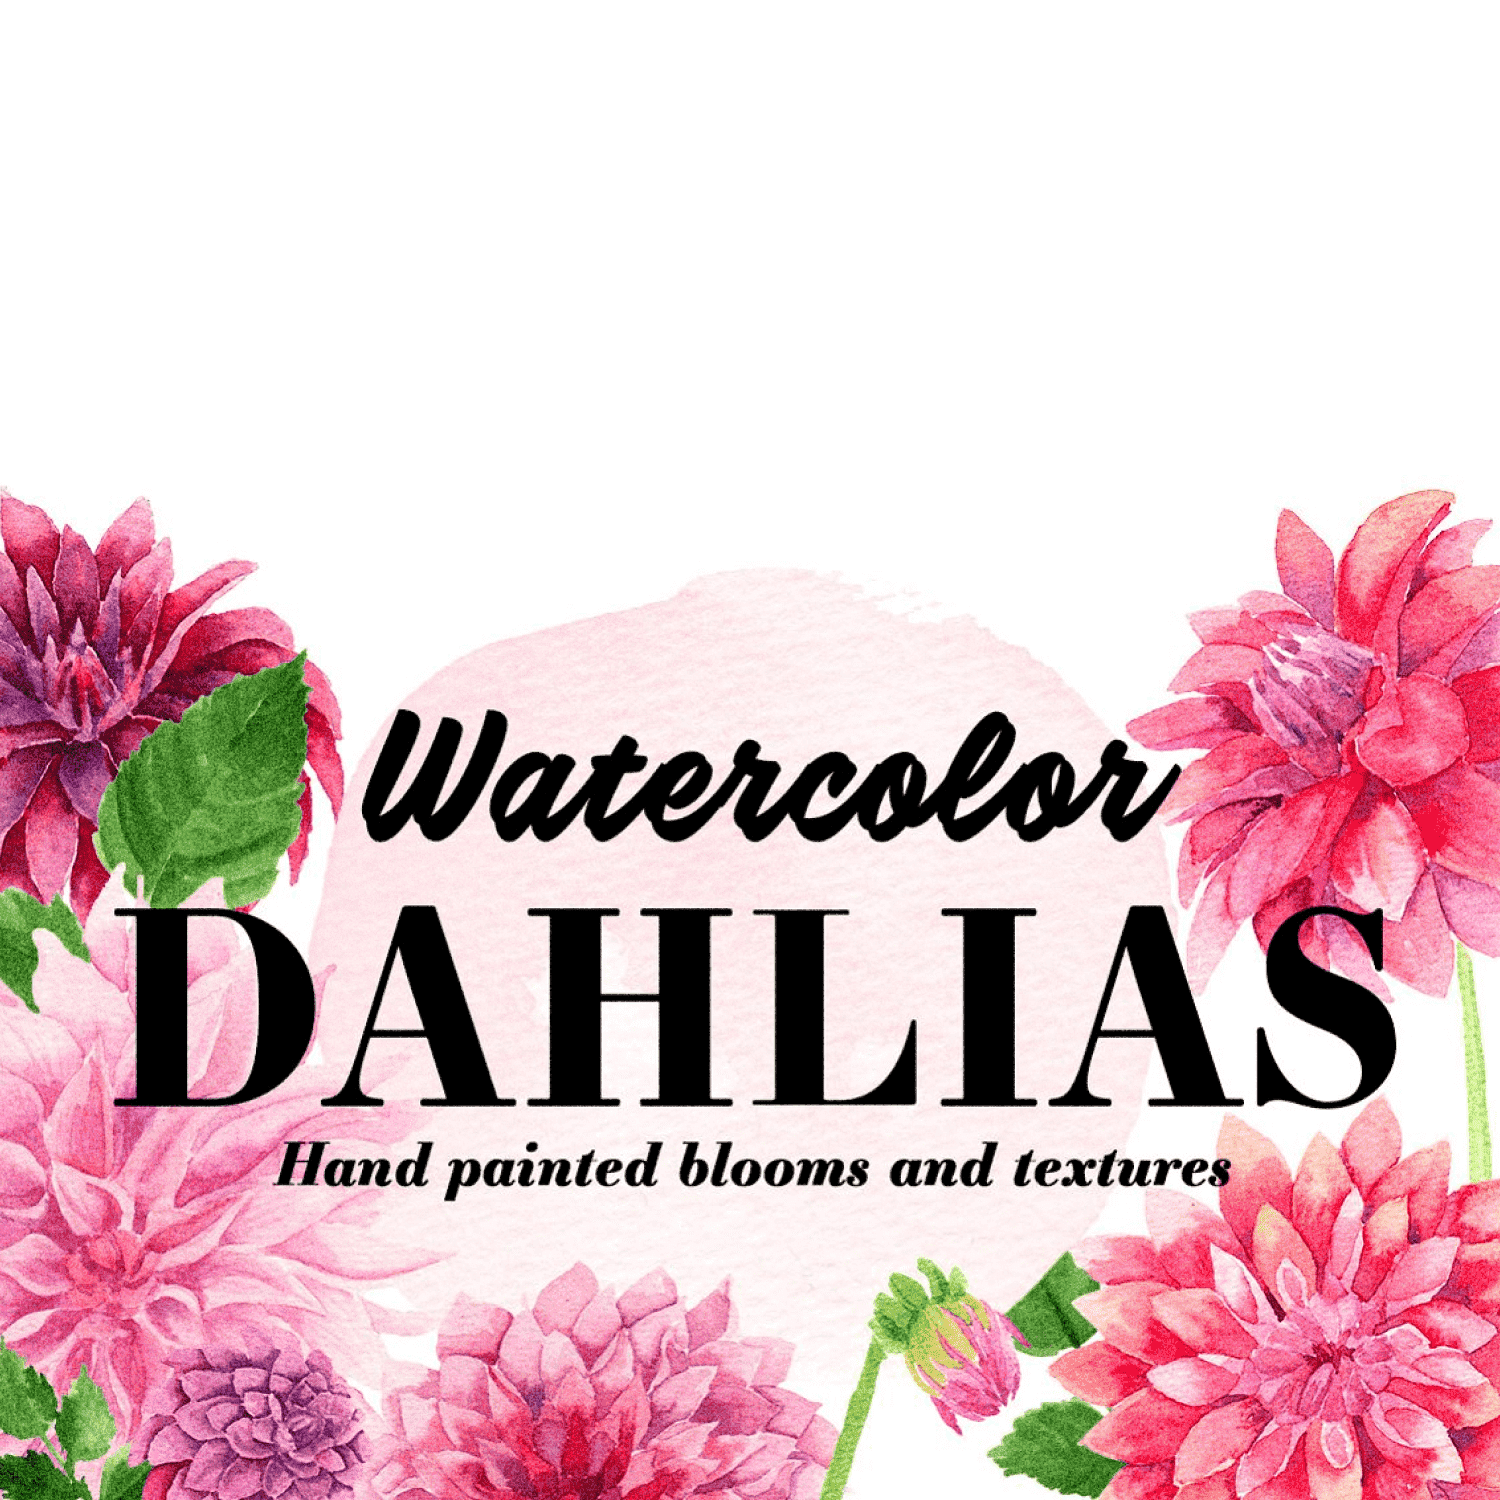 Watercolor Dahlias - Hand Painted Blooms And Textures Preview.